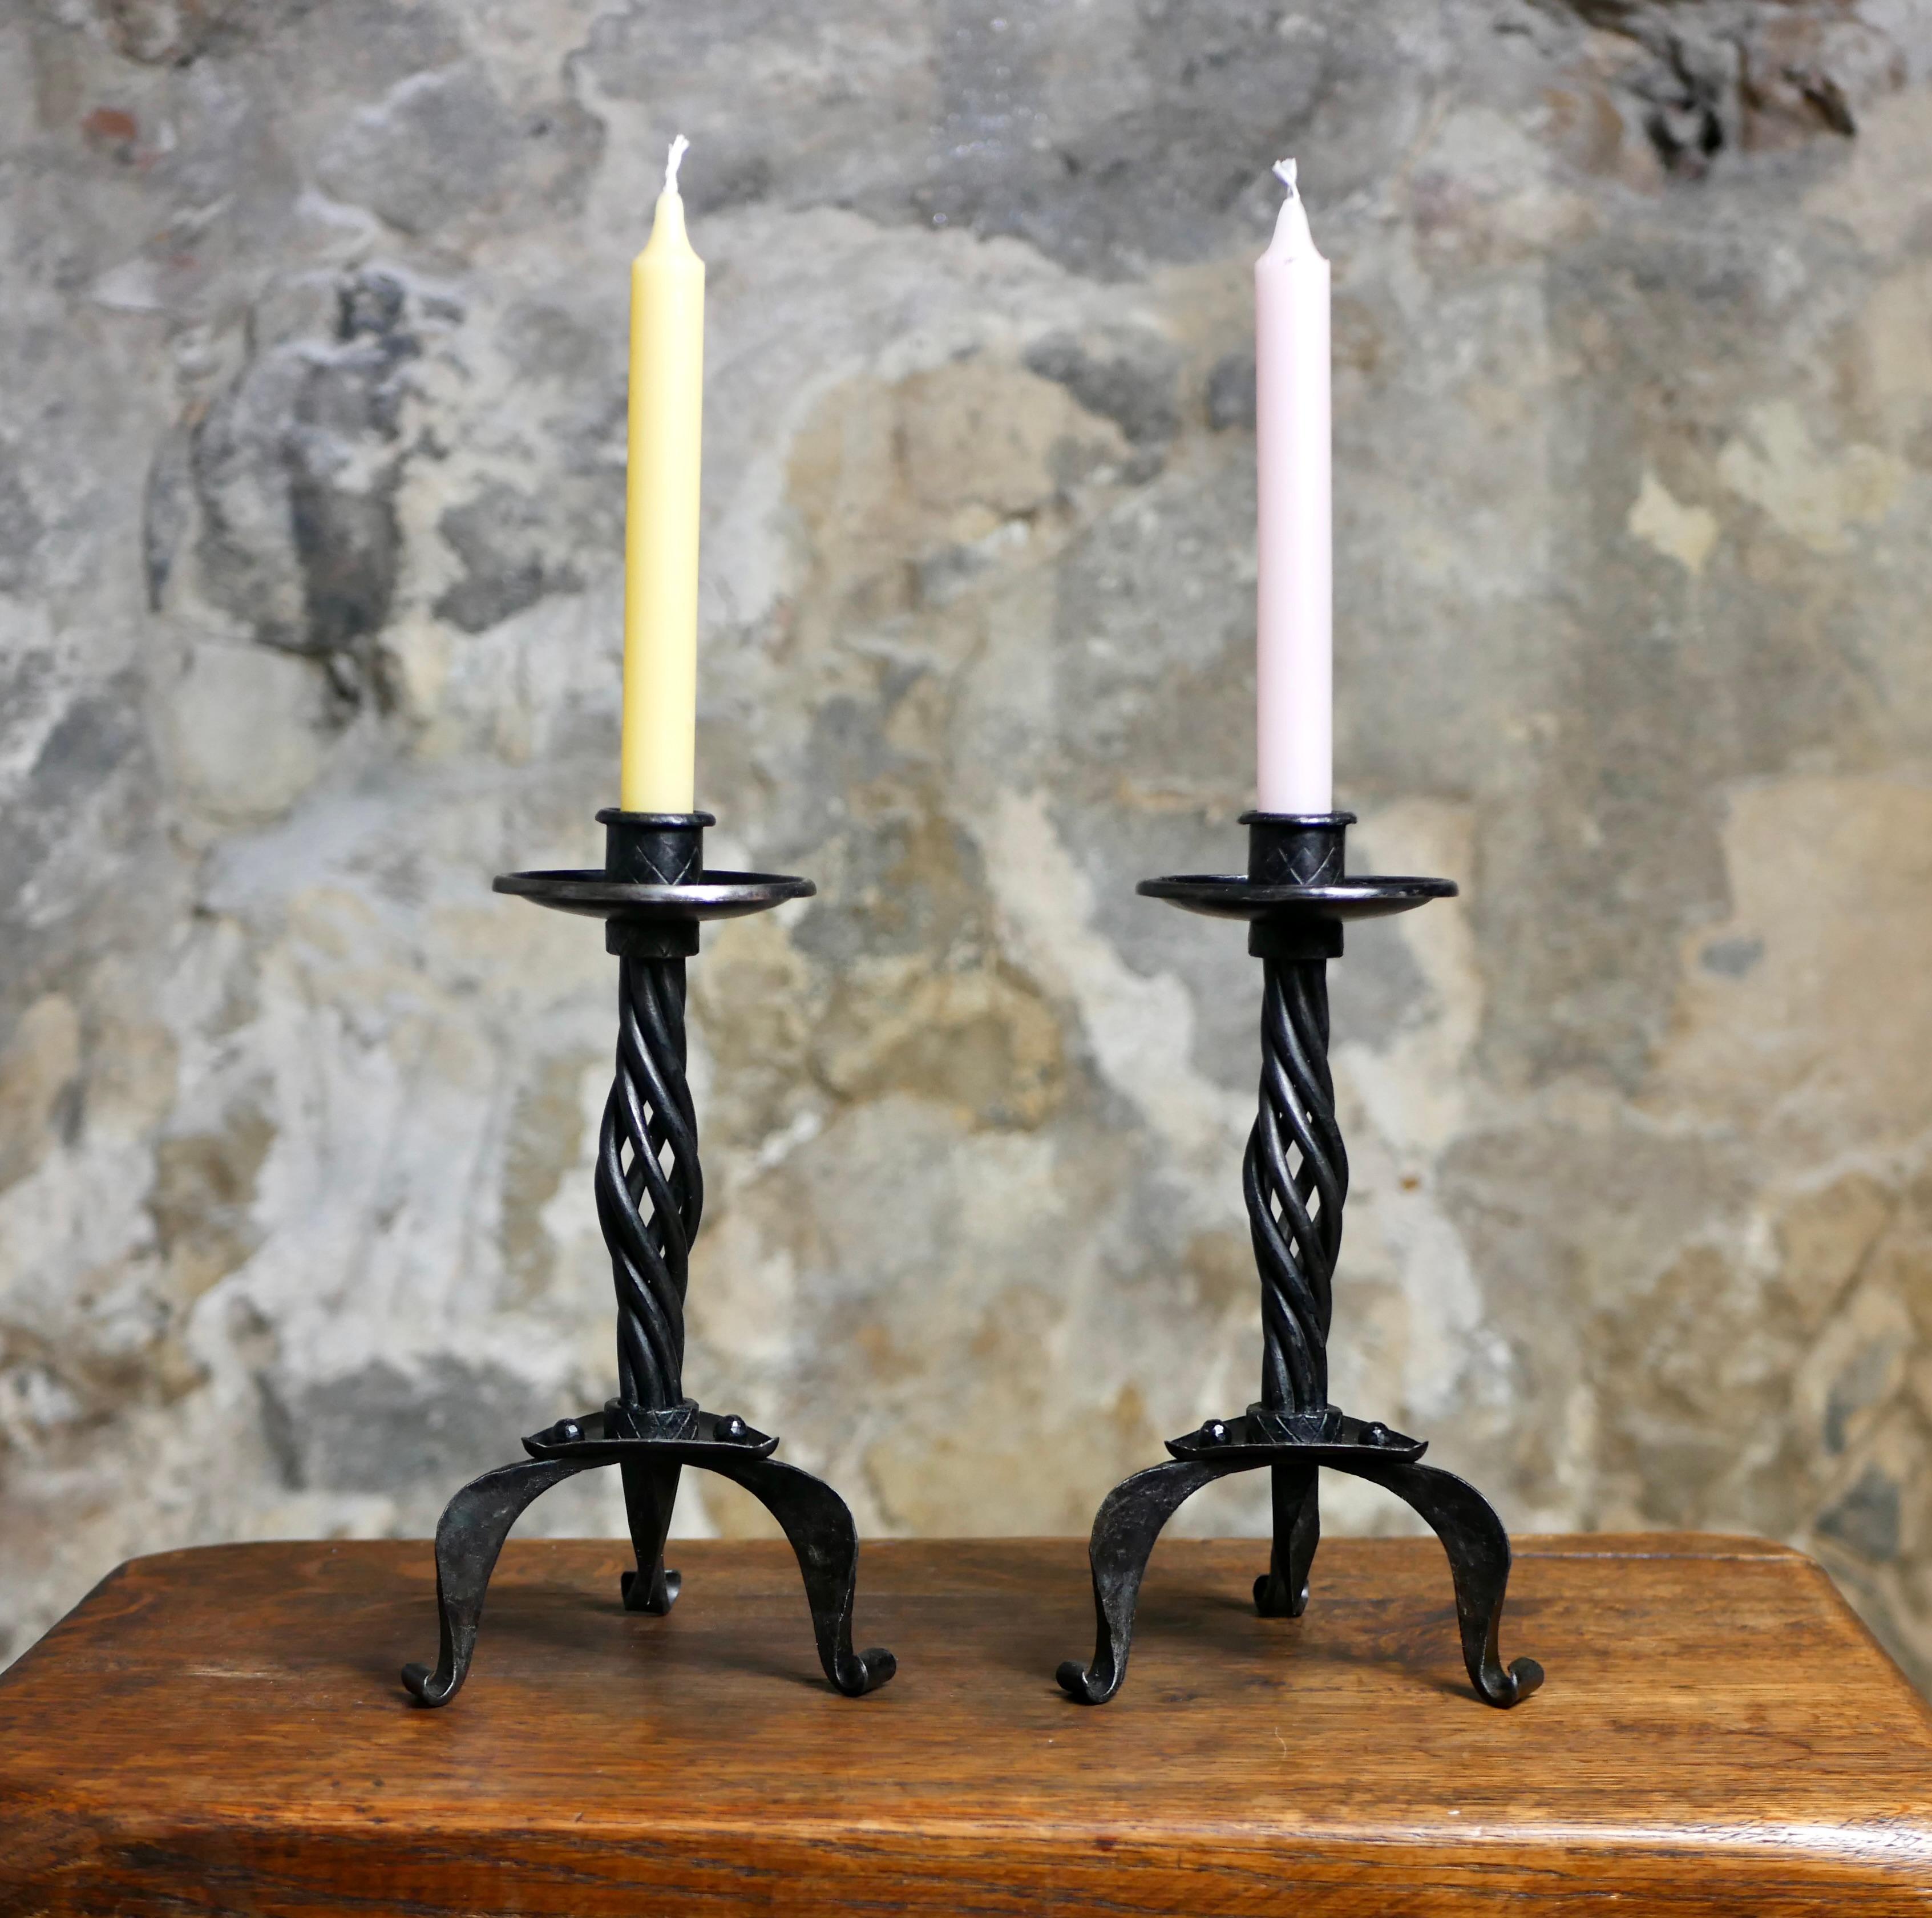 Beautiful pair of metal candlesticks made in France in the 1980s, brutalist style, with lots of details.
Good condition, nice patina.
Dimensions : H26,5, W14cm